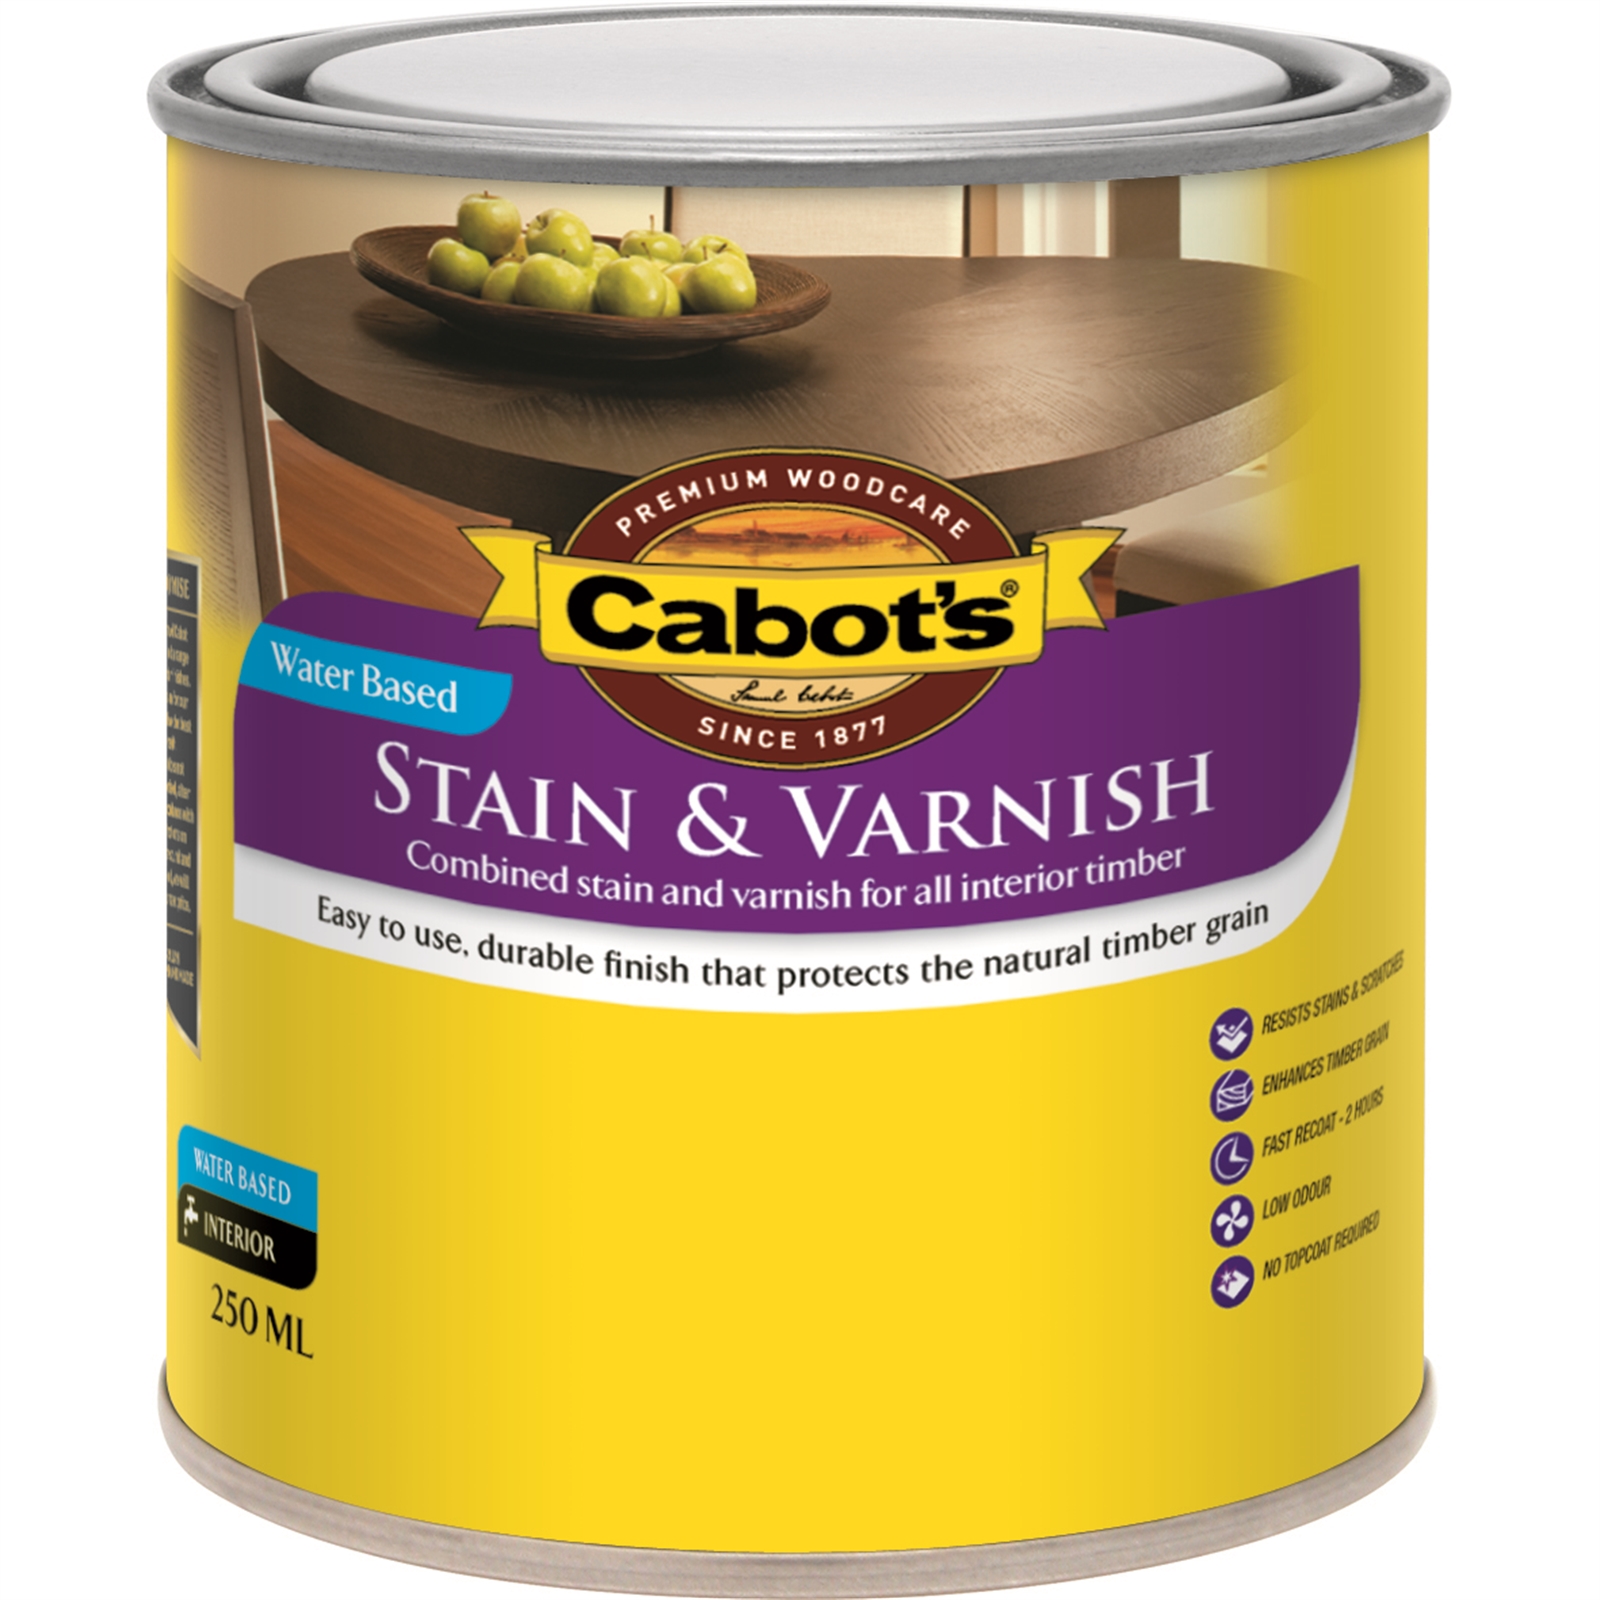 Cabot's 250ml Gloss Cedar Water Based Stain and Varnish